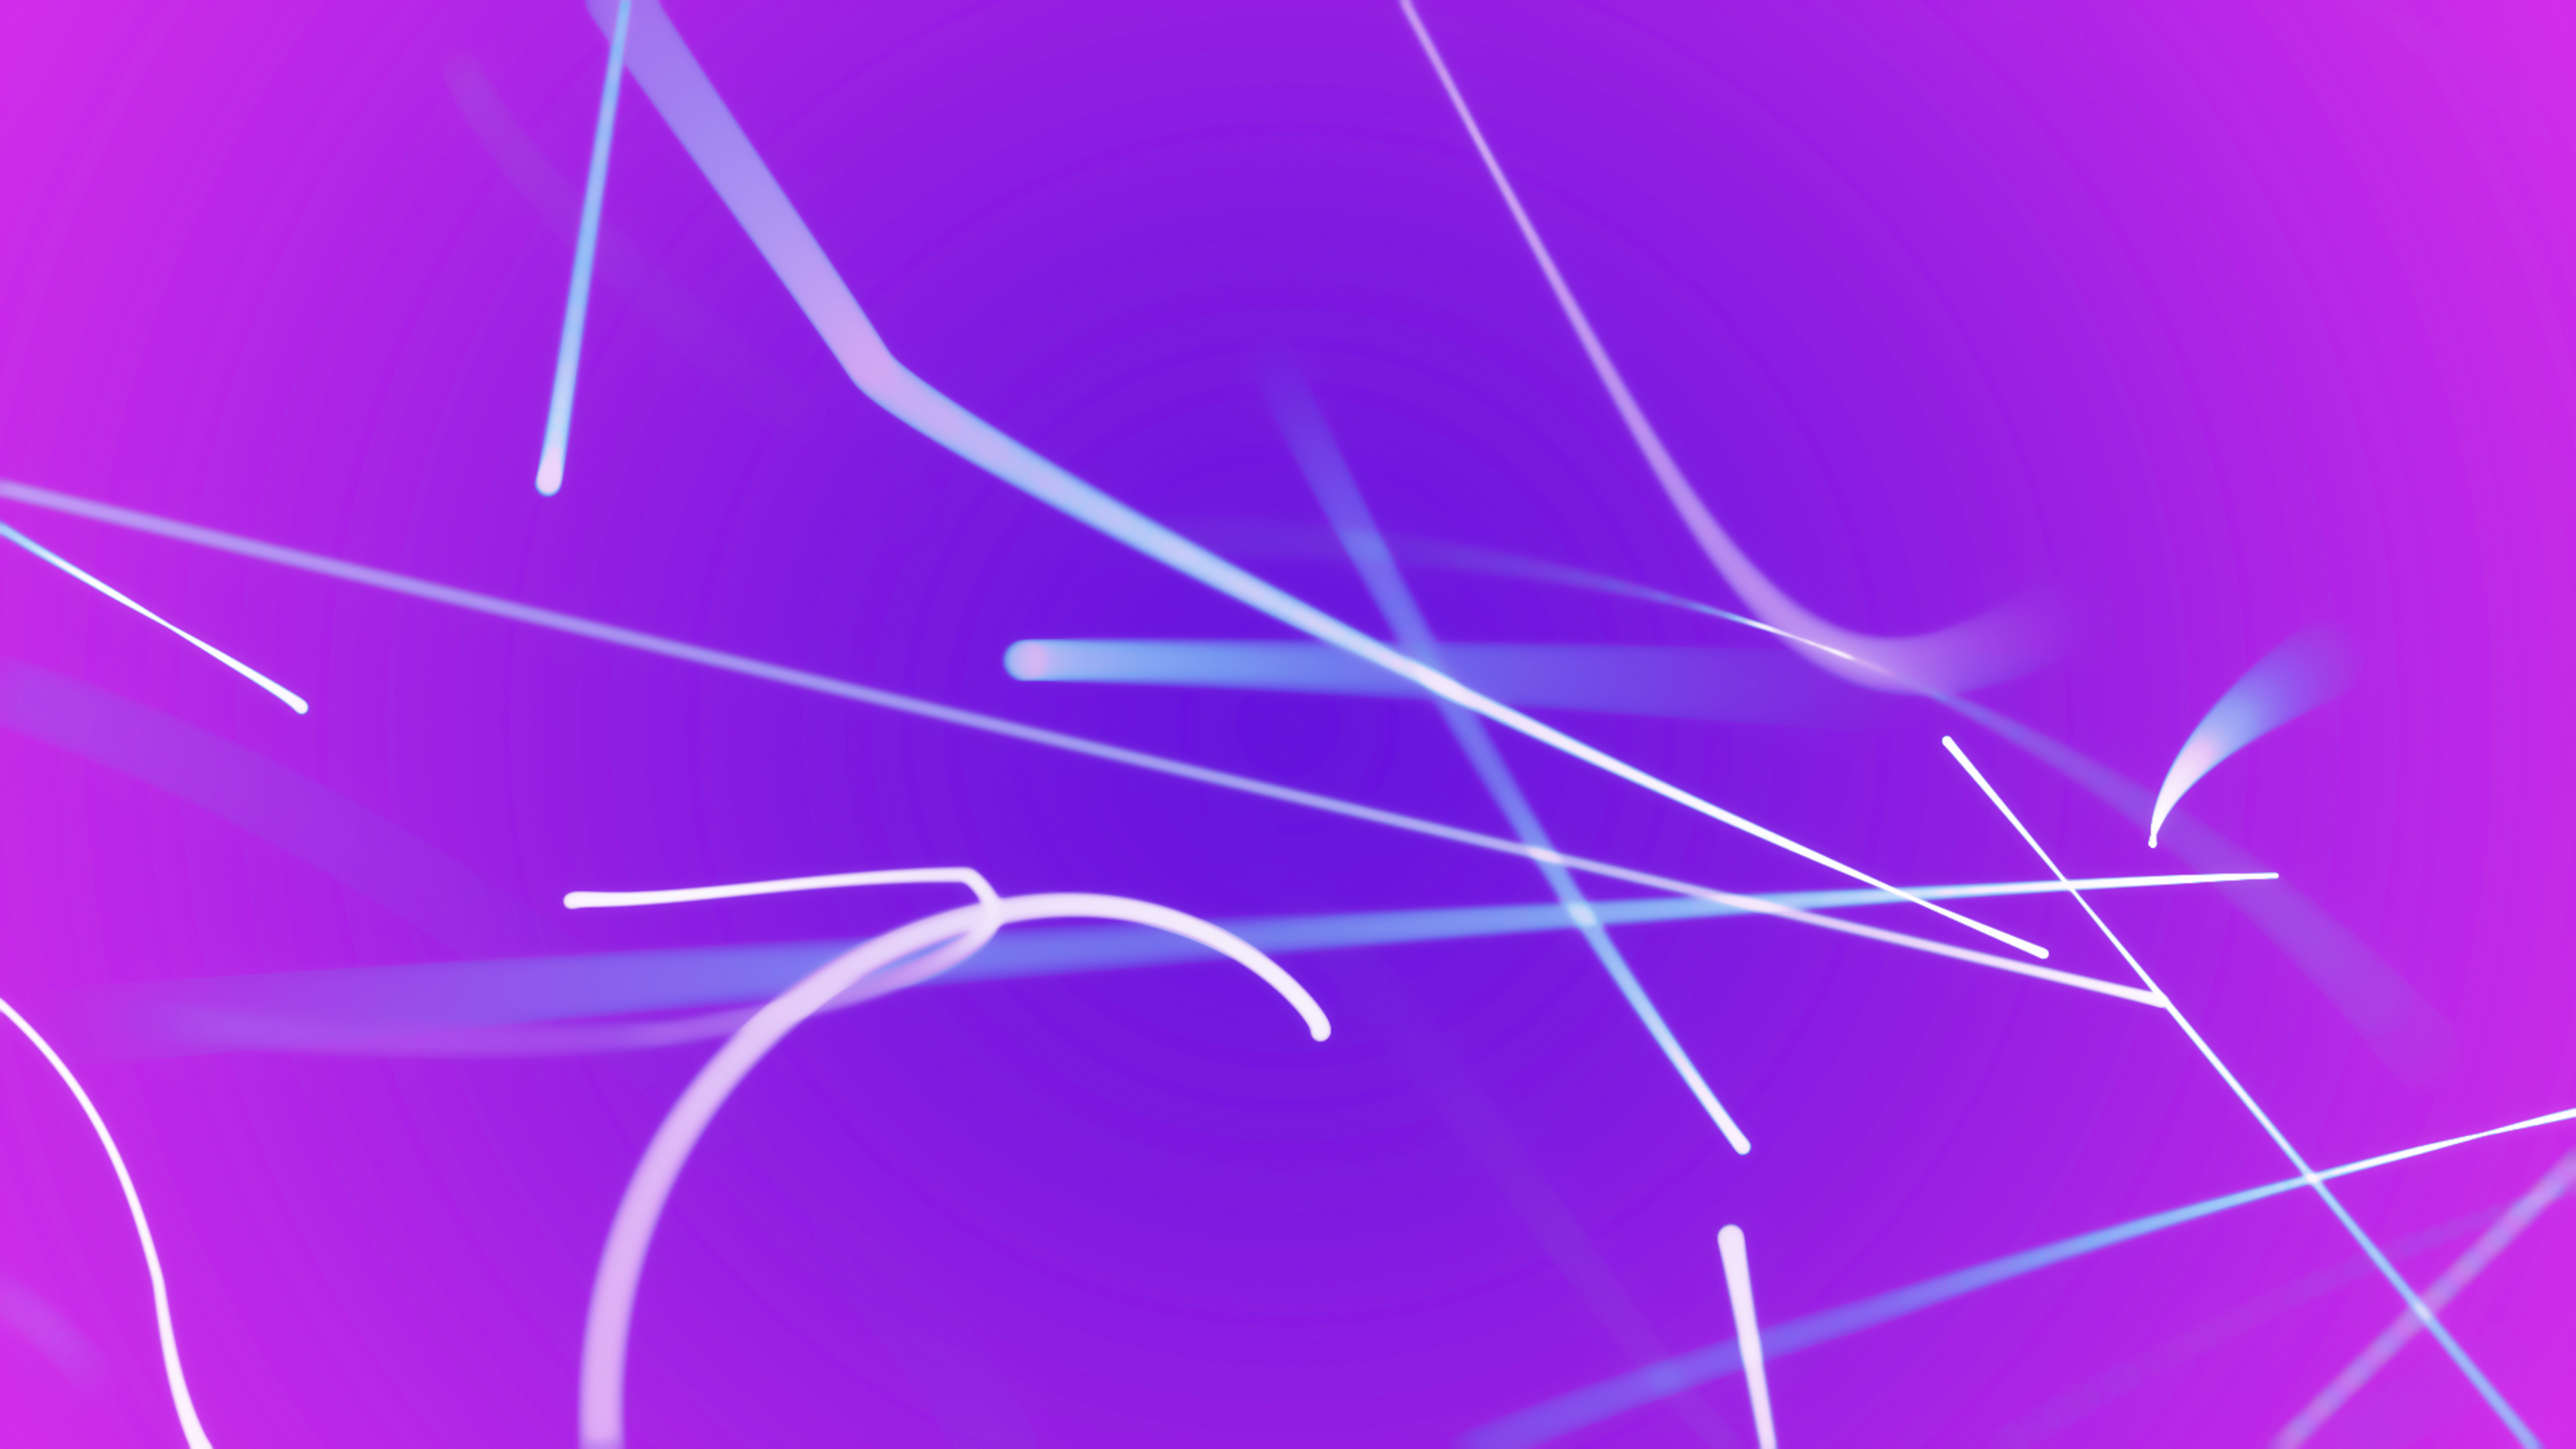 77453 download wallpaper streaks, gradient, stripes, abstract, violet, lines, neon, purple screensavers and pictures for free